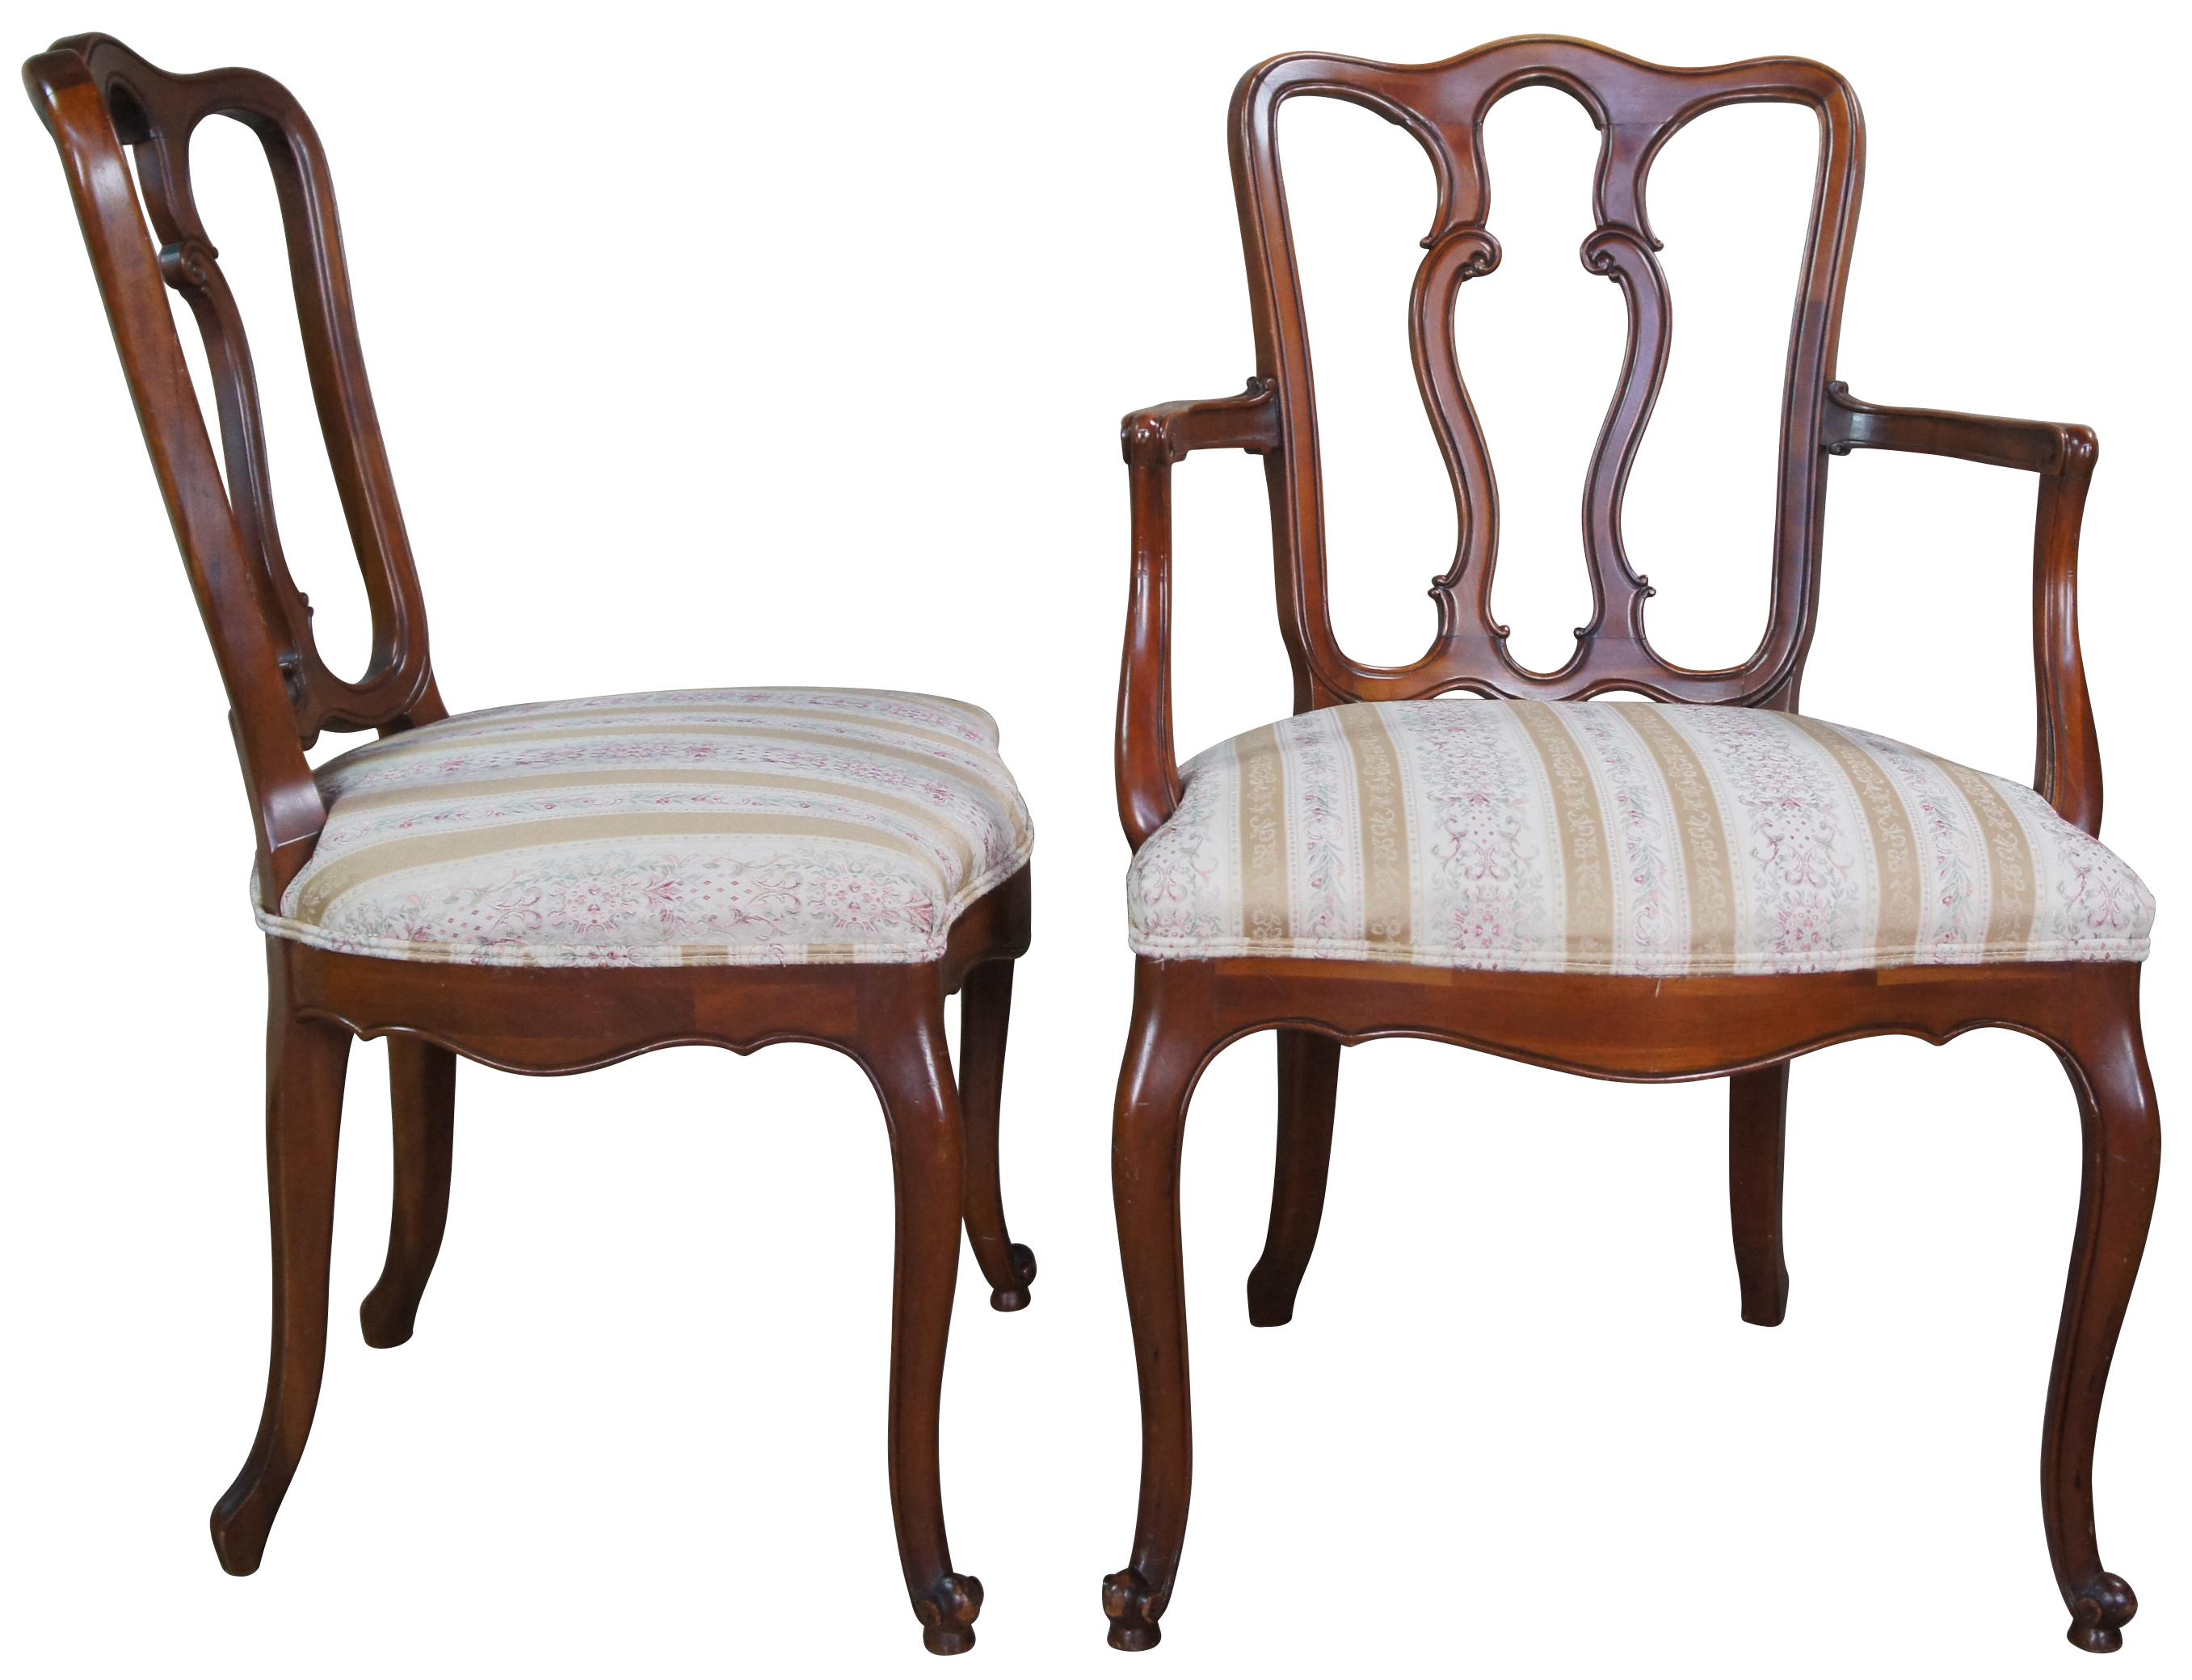 Six vintage Drexel cherry French Provincial dining chairs featuring an open Pretzel back with 